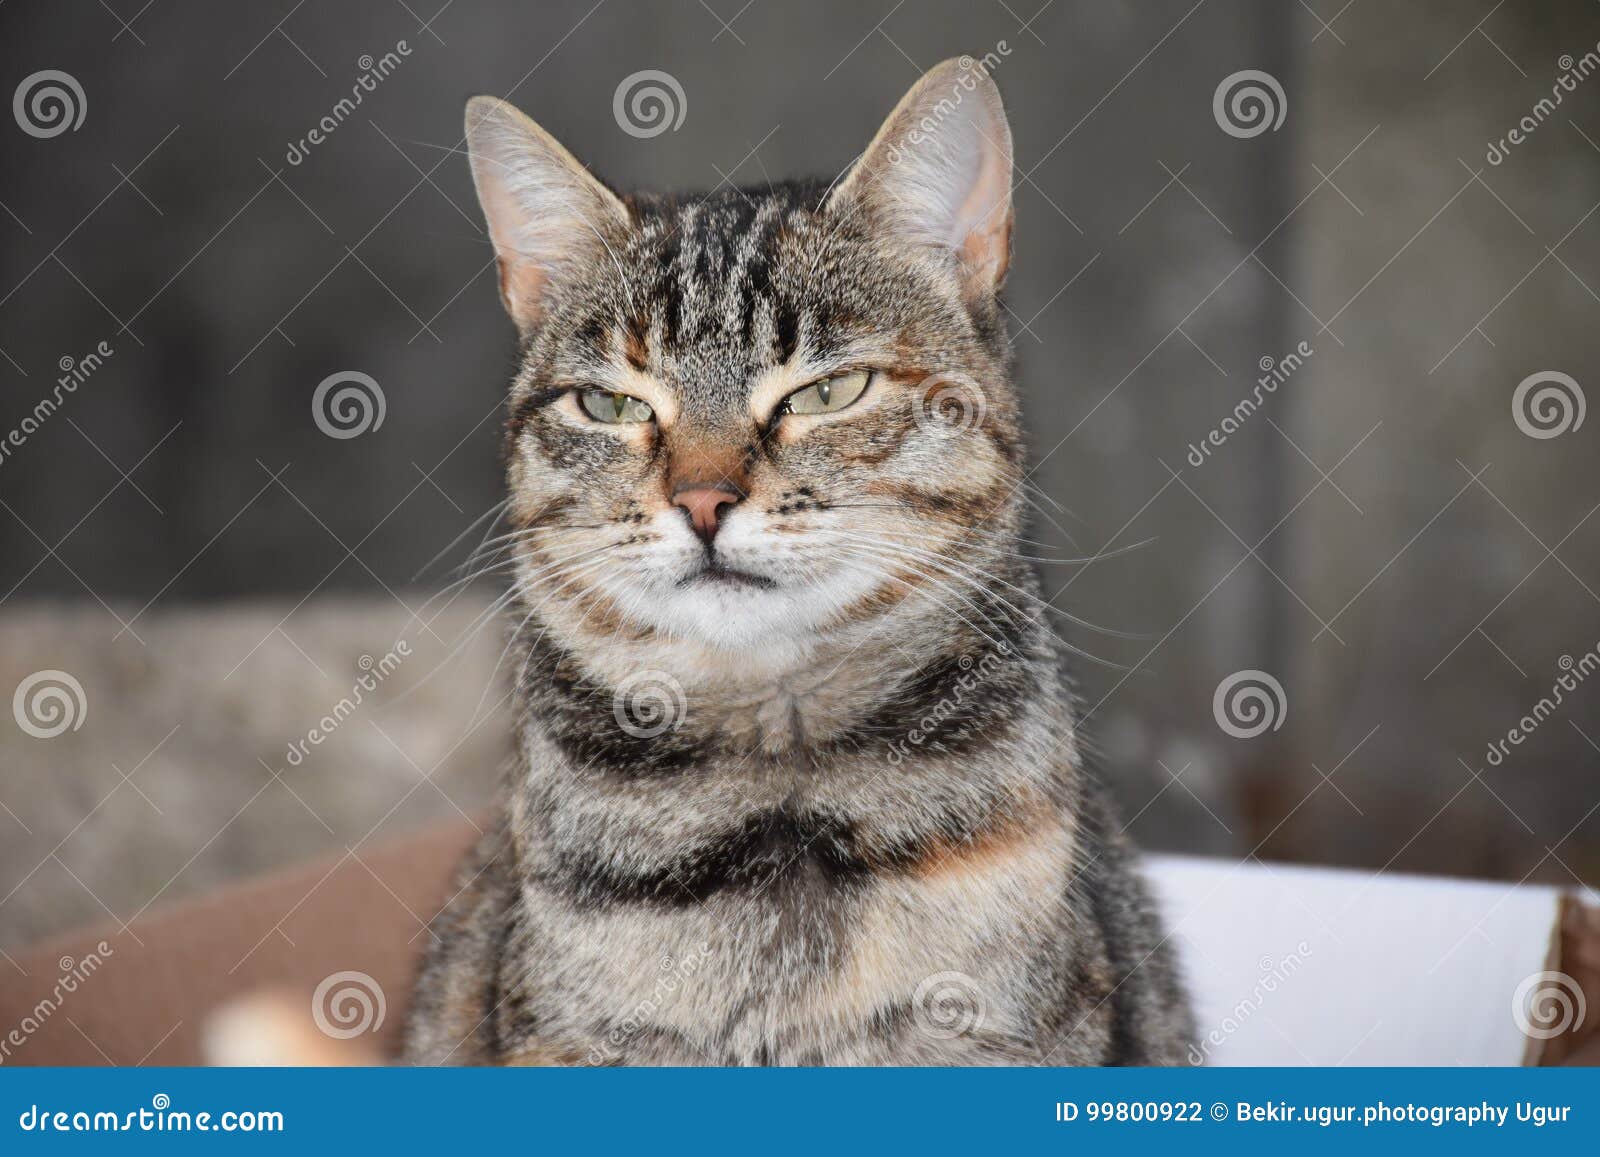 cat with funny expression